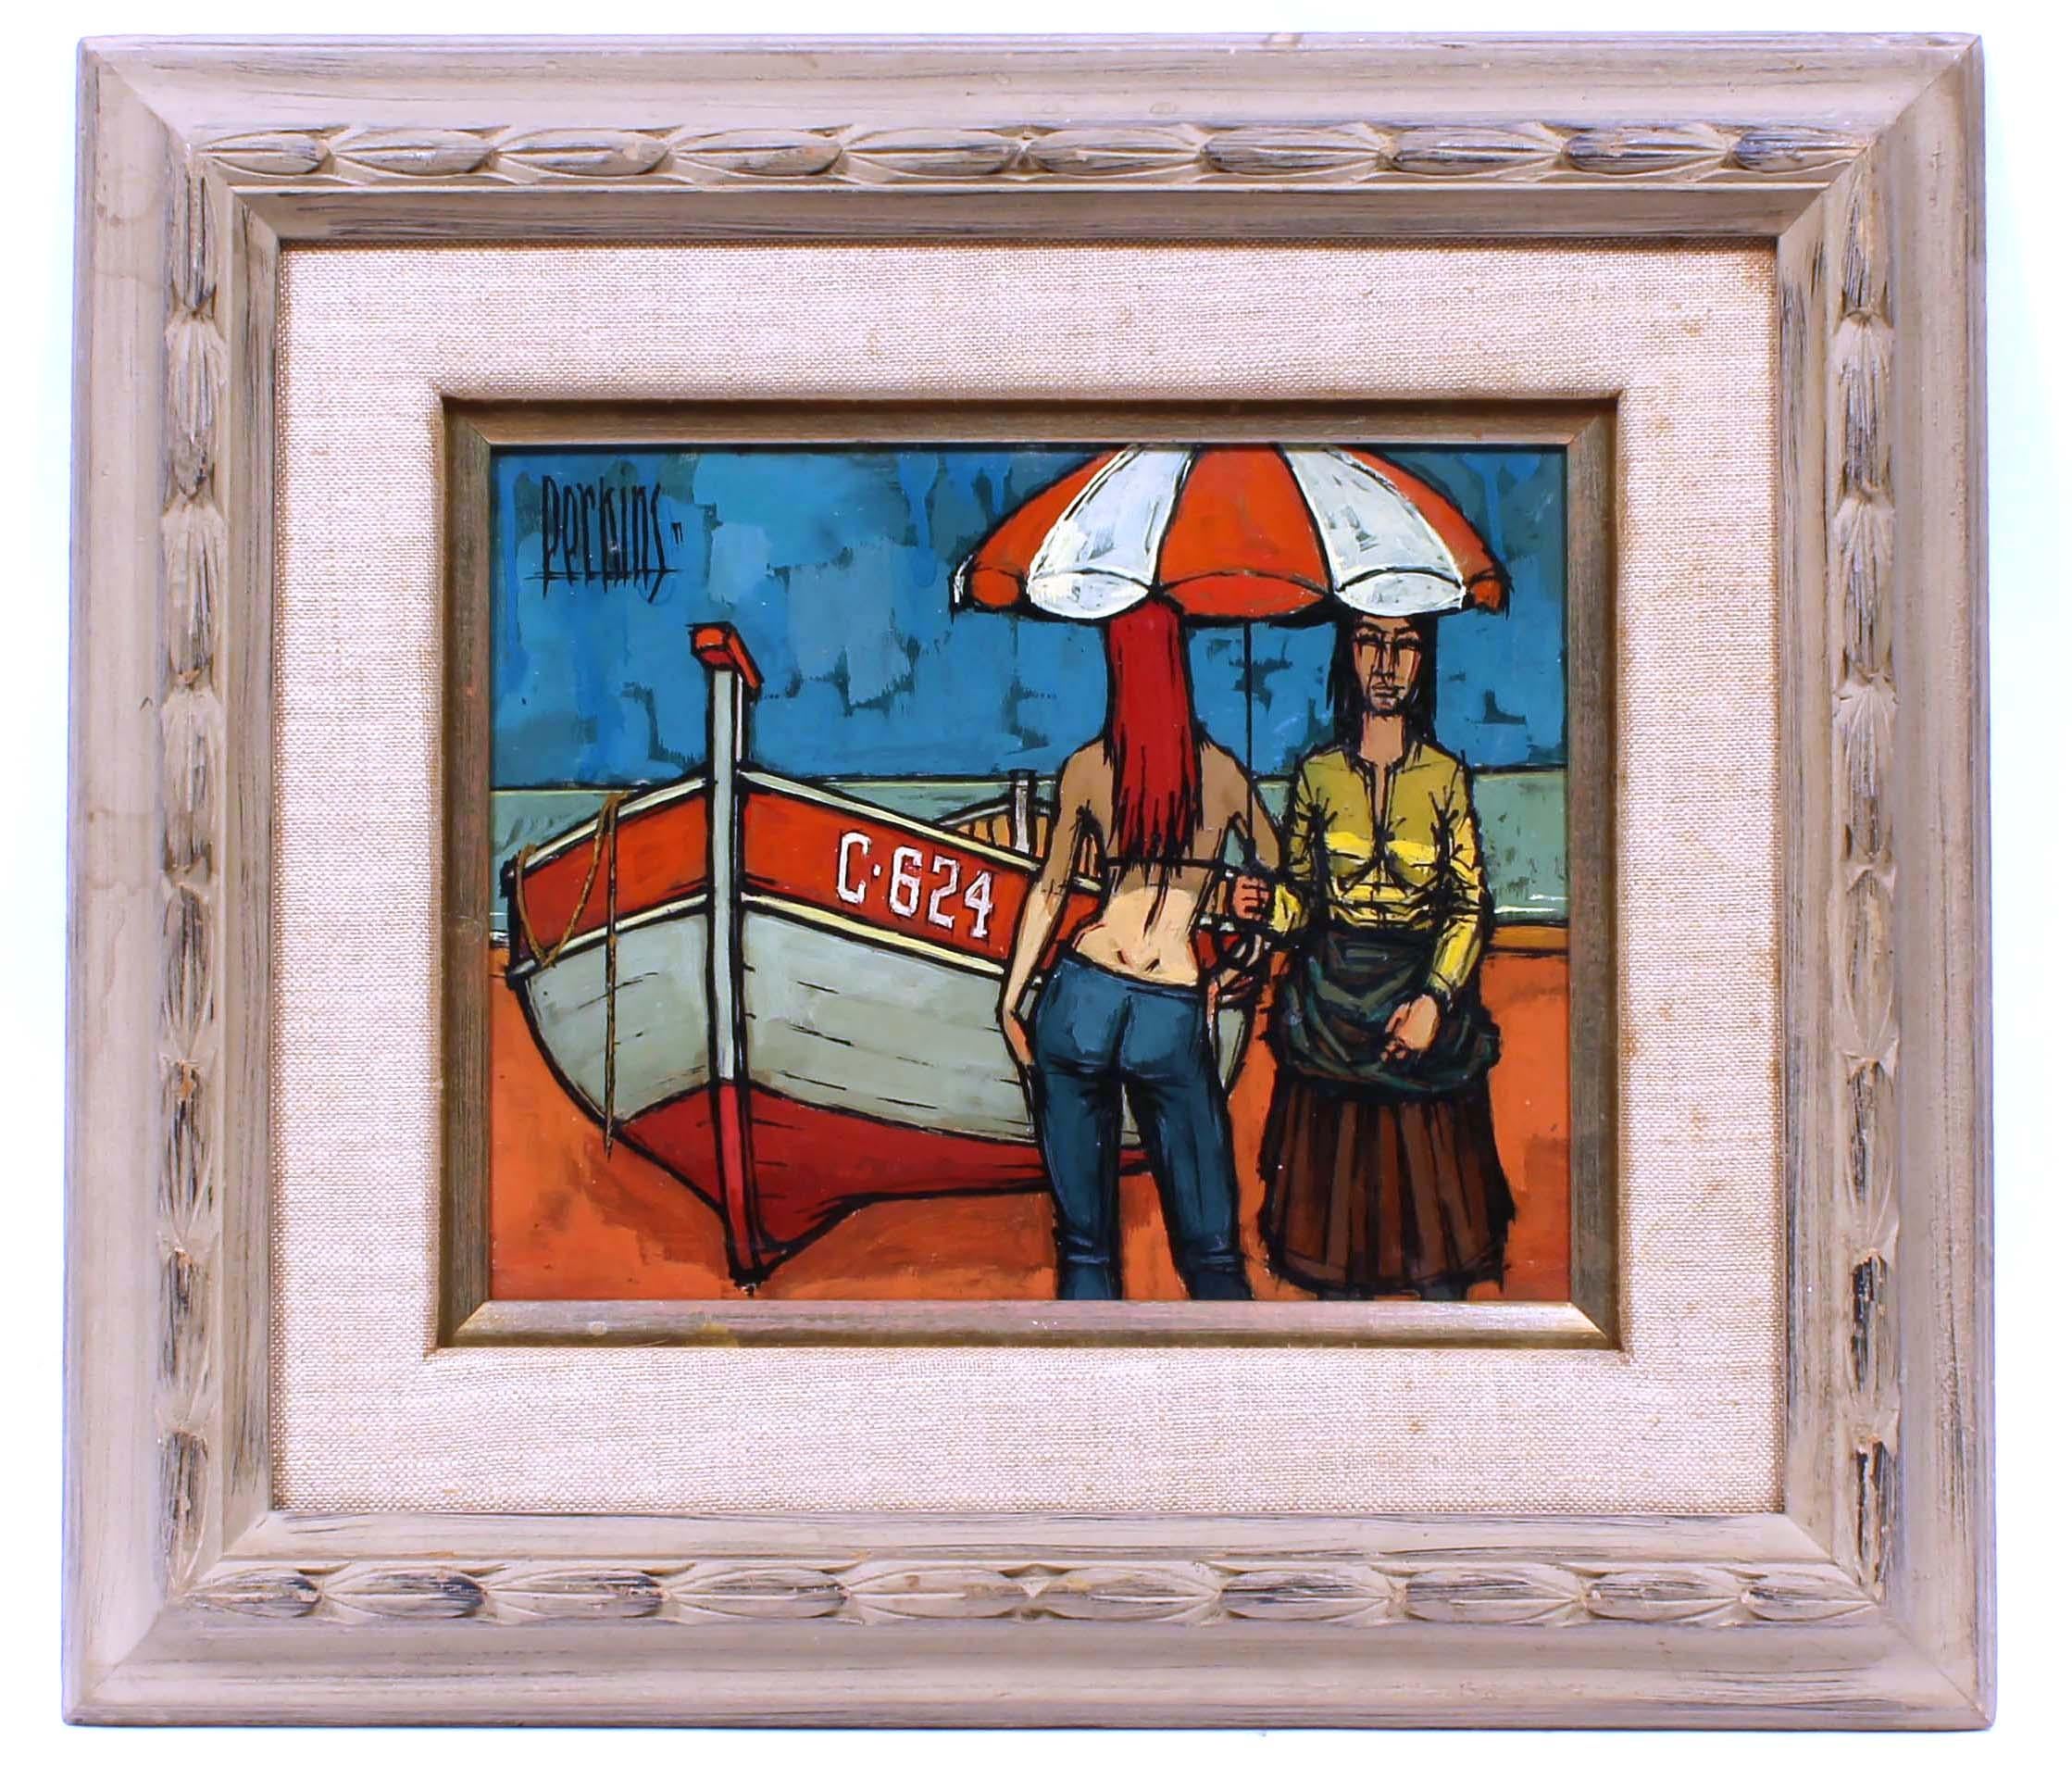 Vintage American colorful kitschy realist painting of women at the beach with a boat by well listed artist Phillip R. Perkins. Framed, oil on board.

Born in a small town in Illinois, Philip R. Perkins became a painter widely acknowledged for his